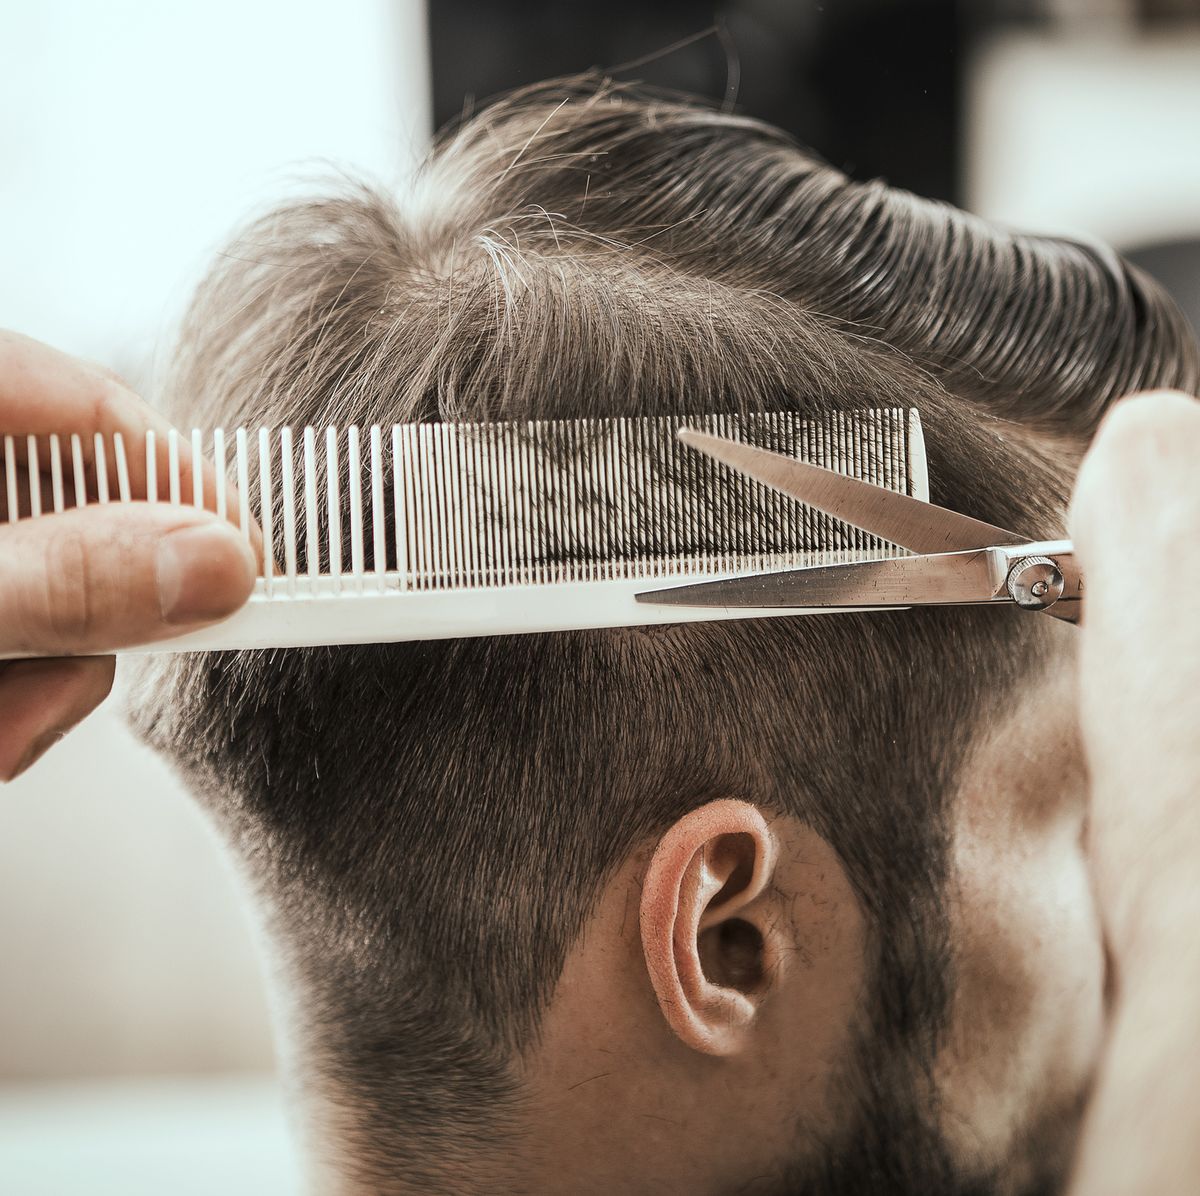 A Complete Guide to All Types of Men's Haircuts - Haircut Names